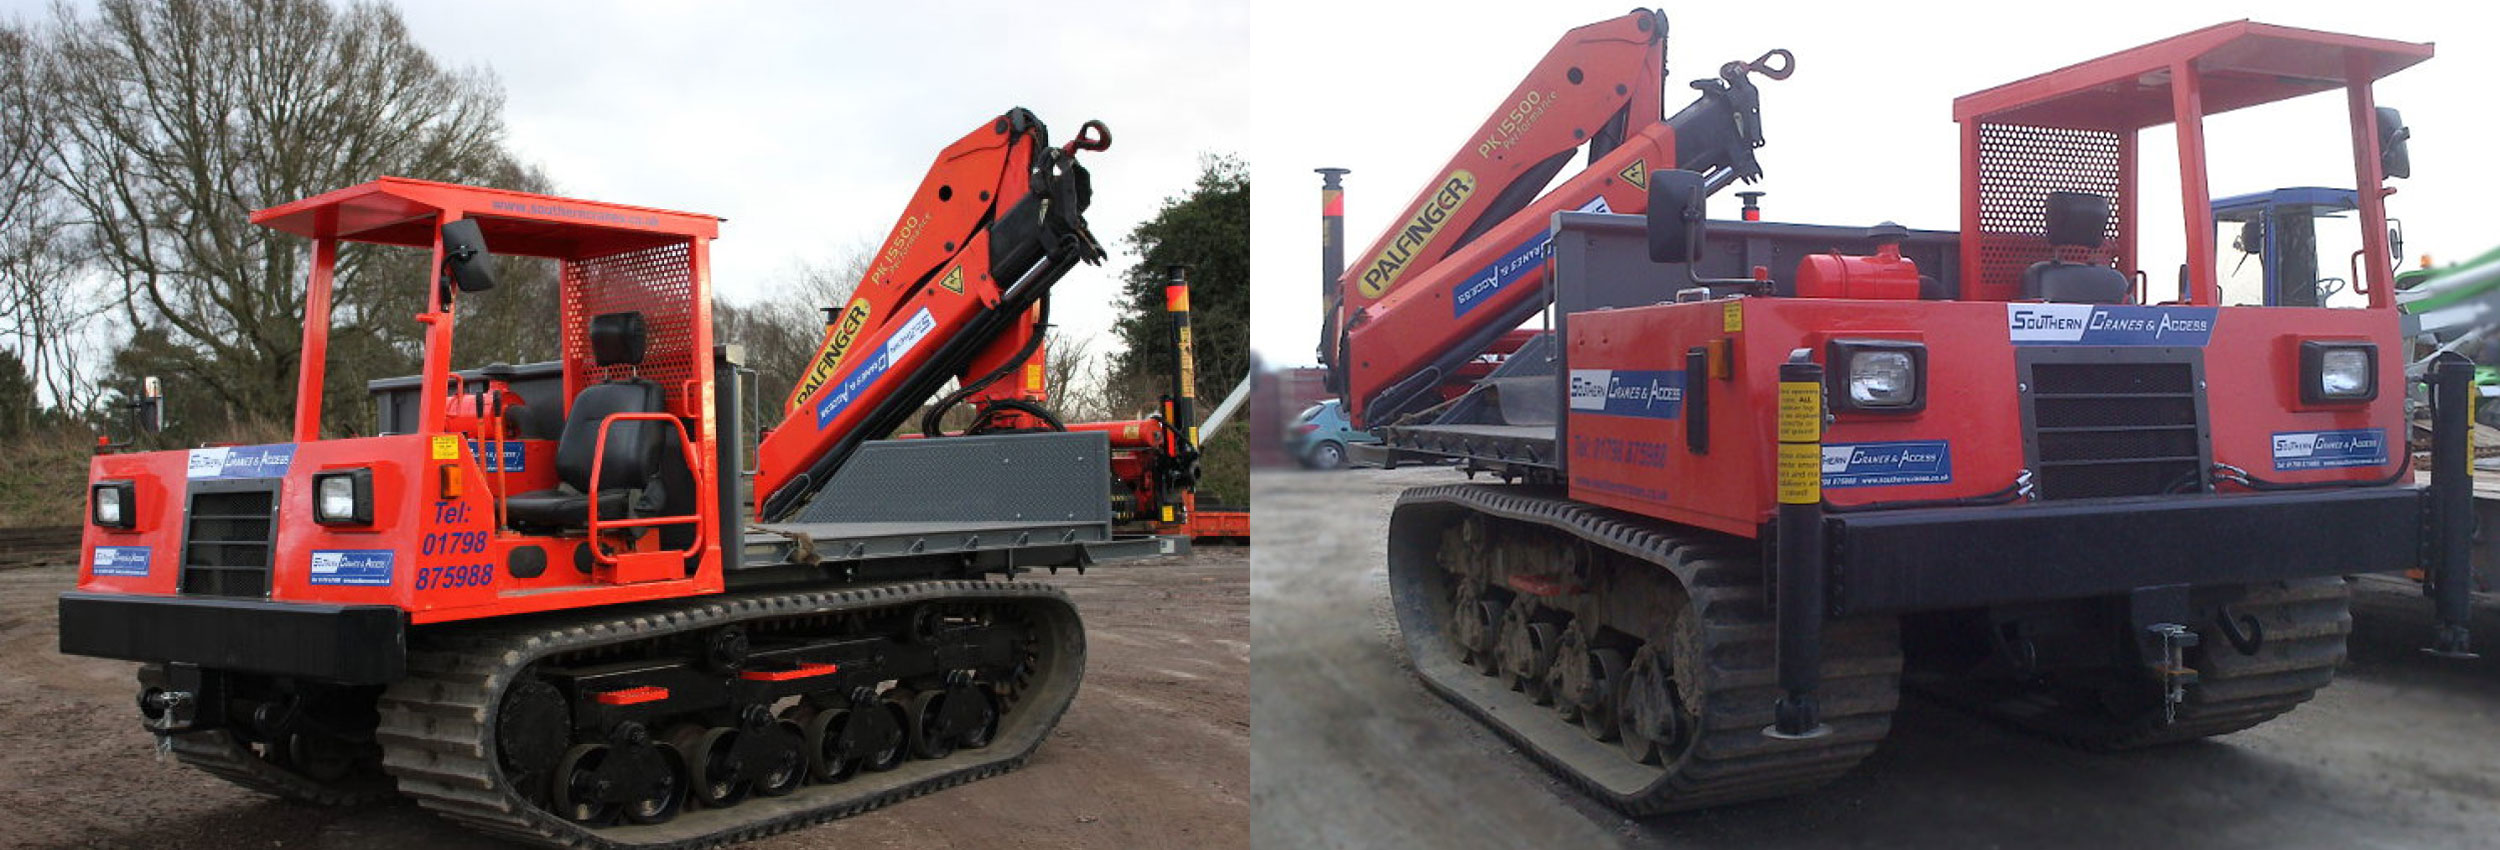 Tracked carrier hire at Southern Cranes & Access, West Sussex, South East, London